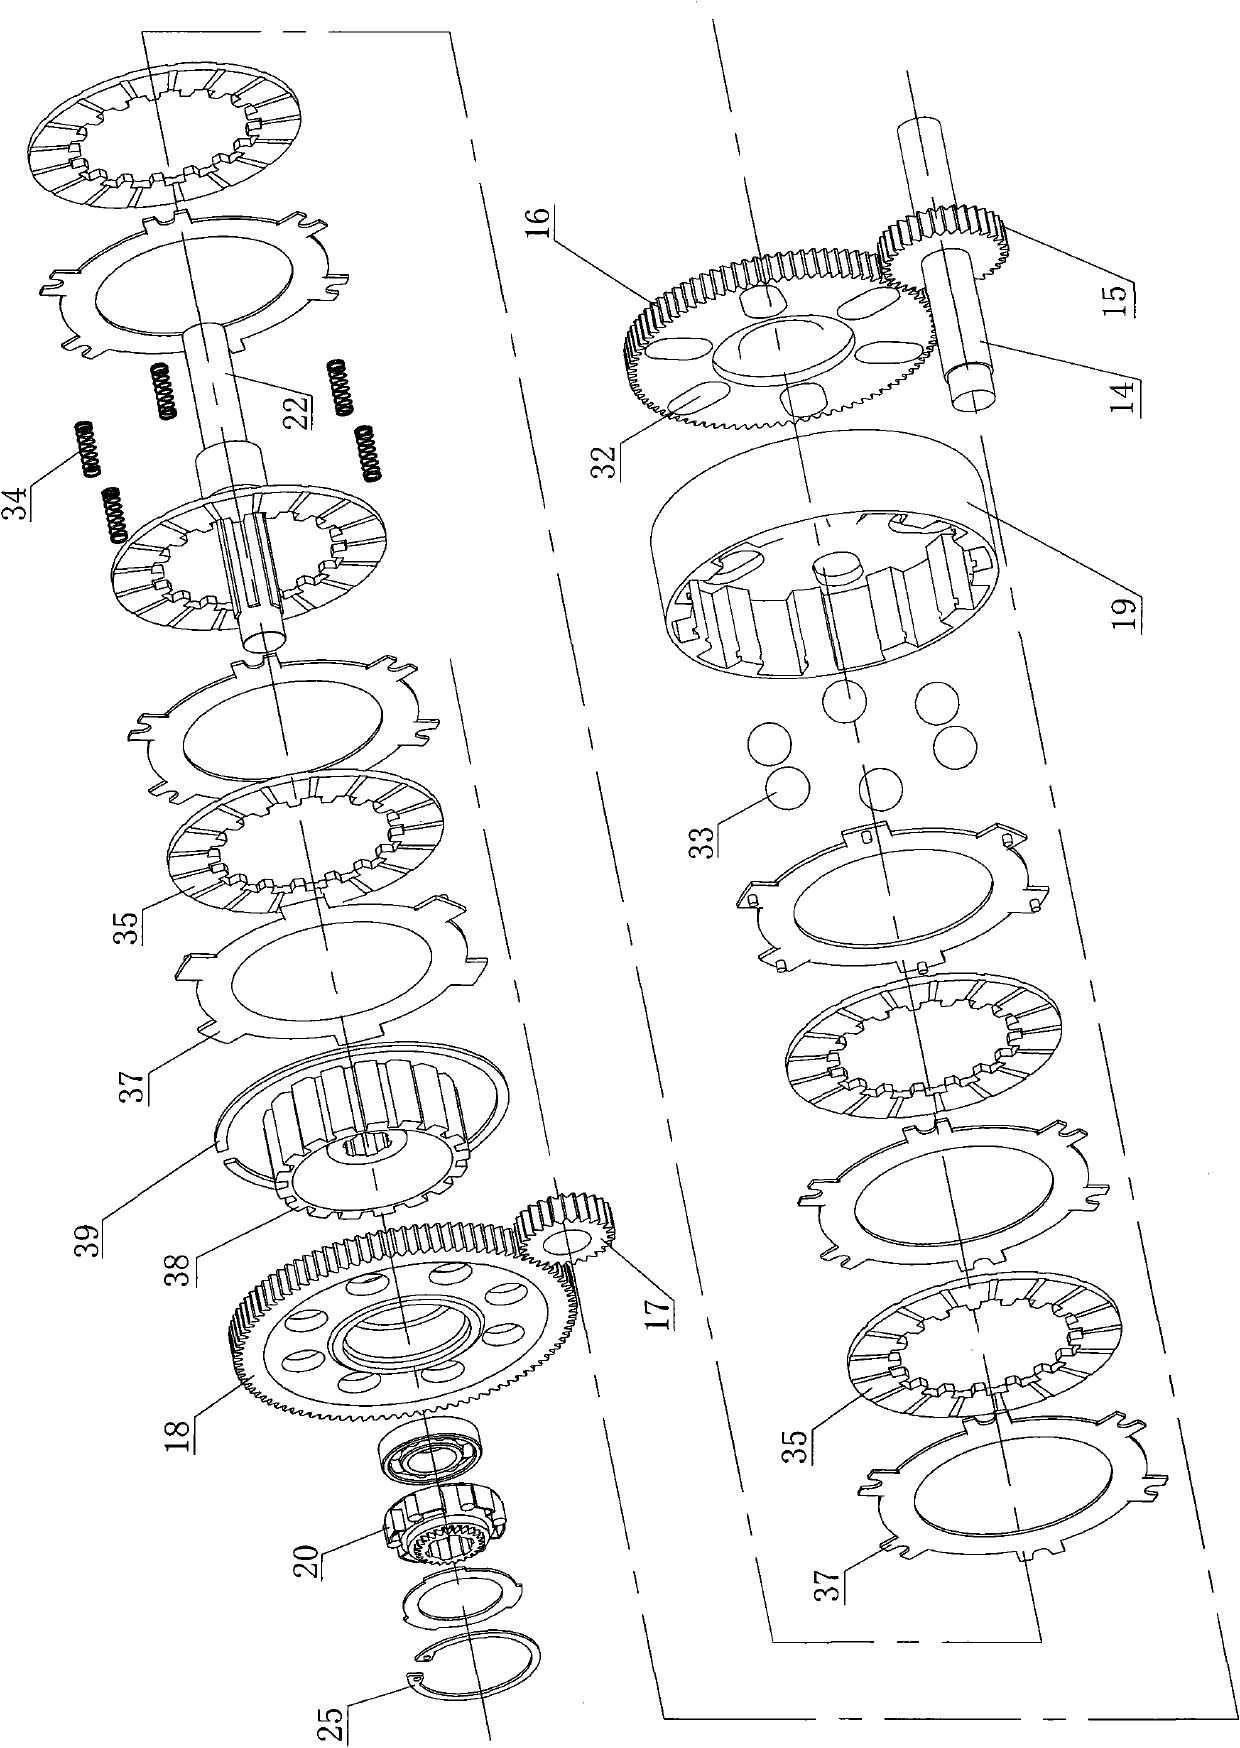 Automatic variable power transmission mechanism of electric motor car